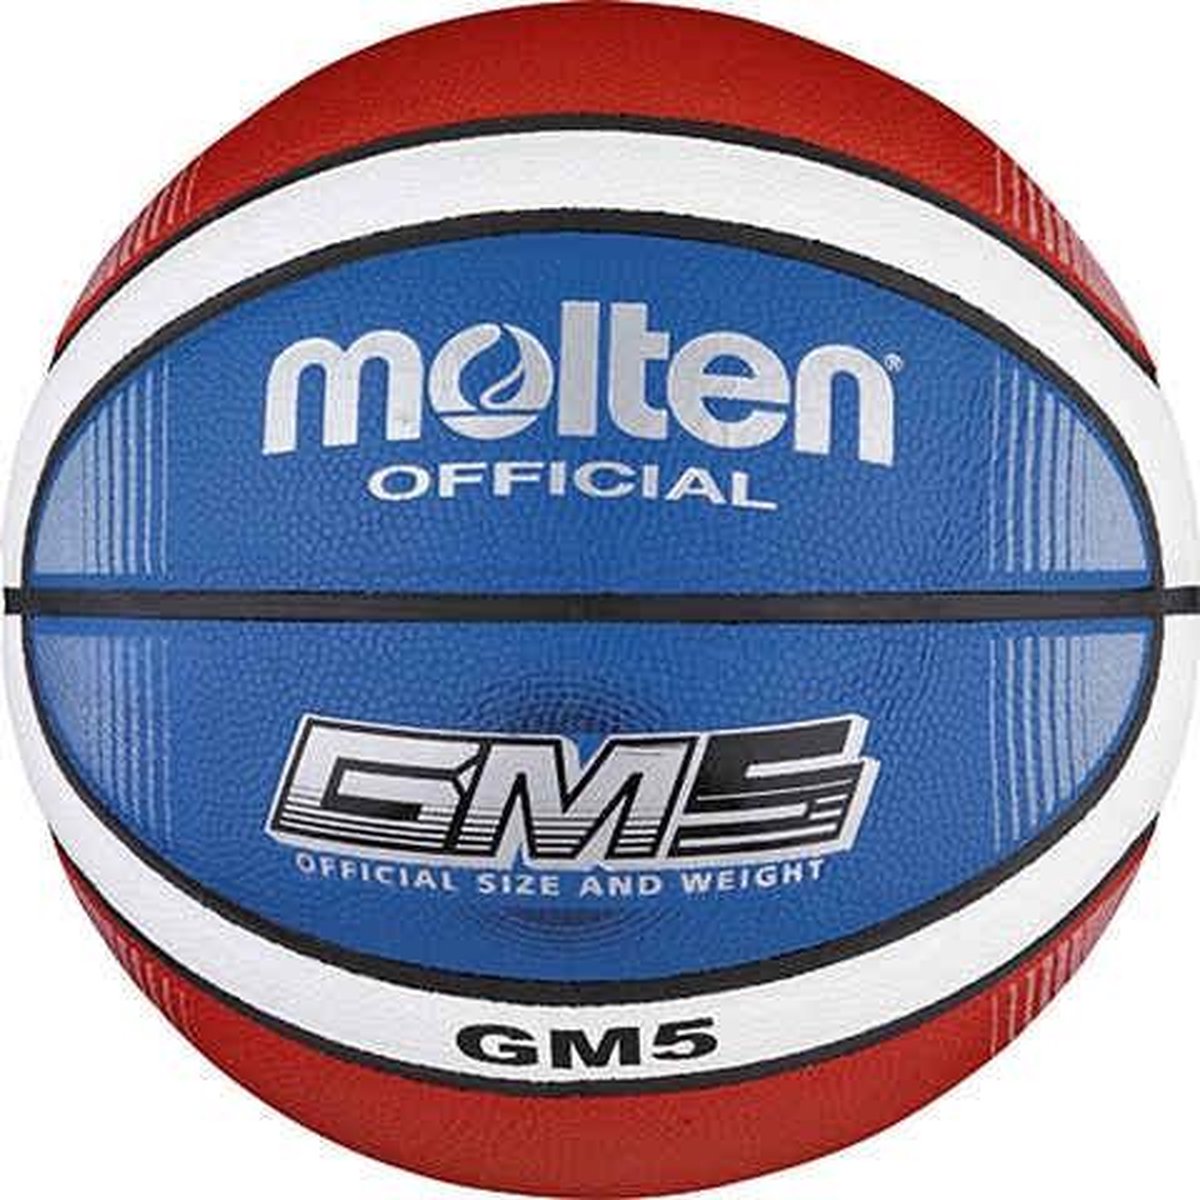 Basketball ball TOP training MOLTEN BGMX5-C, synth. leather size 5